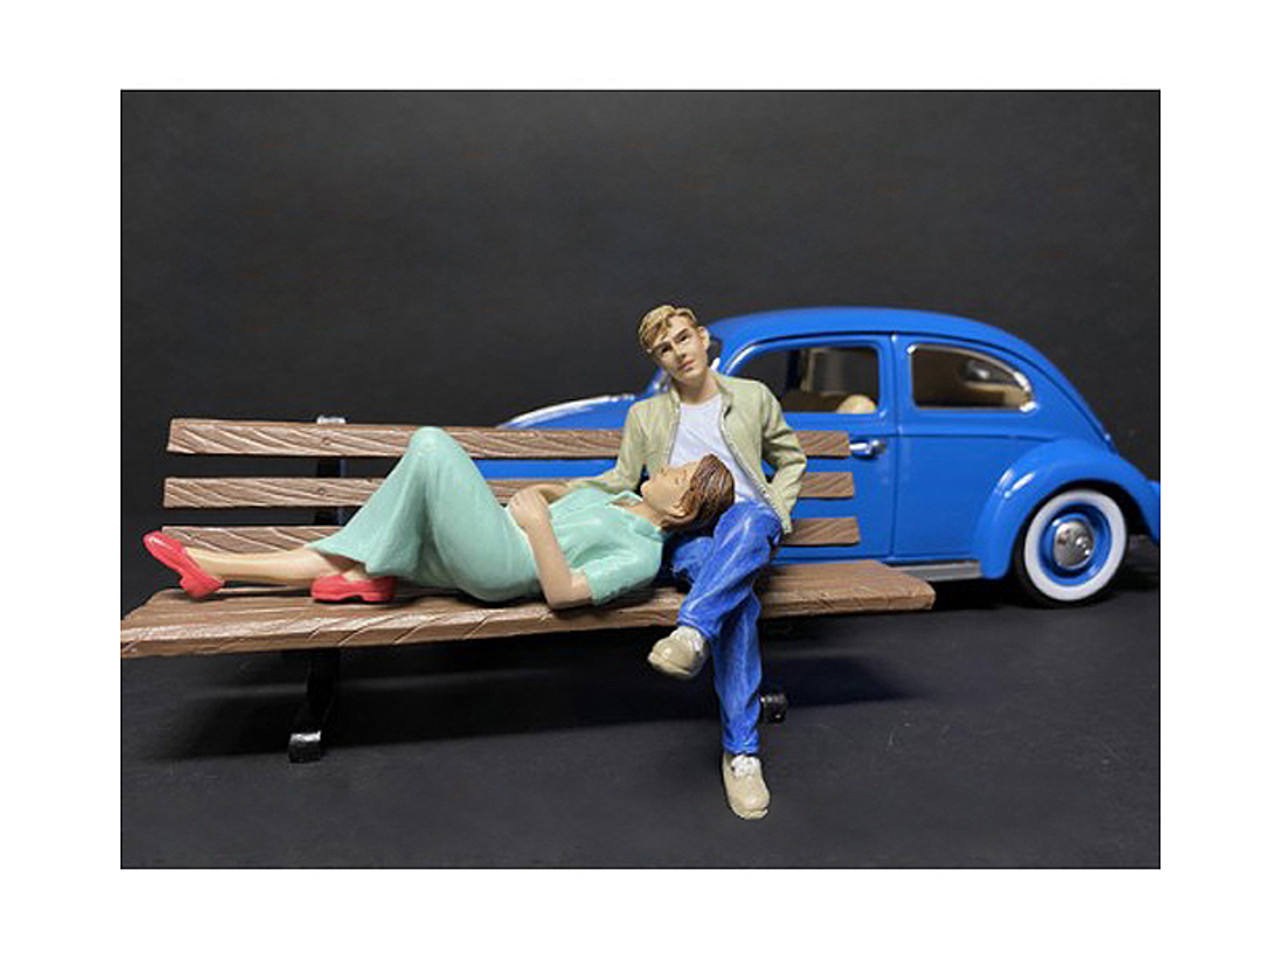 Sitting Lovers 2 piece Figurine Set for 1/24 Scale Models by American Diorama